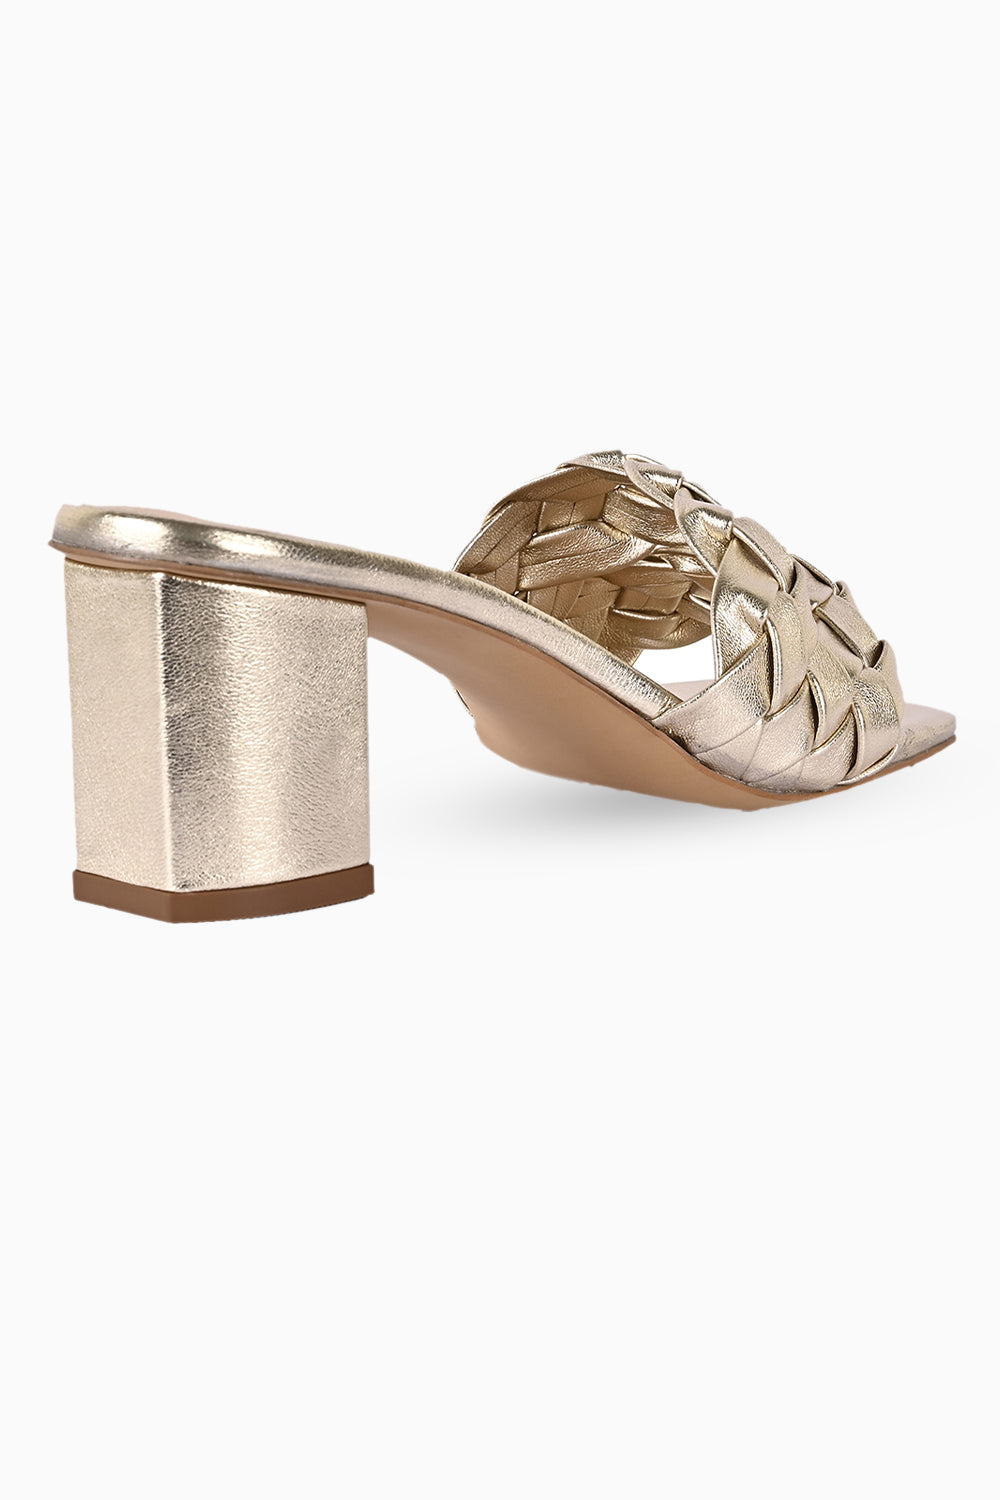 Delina Gold Leather Heels